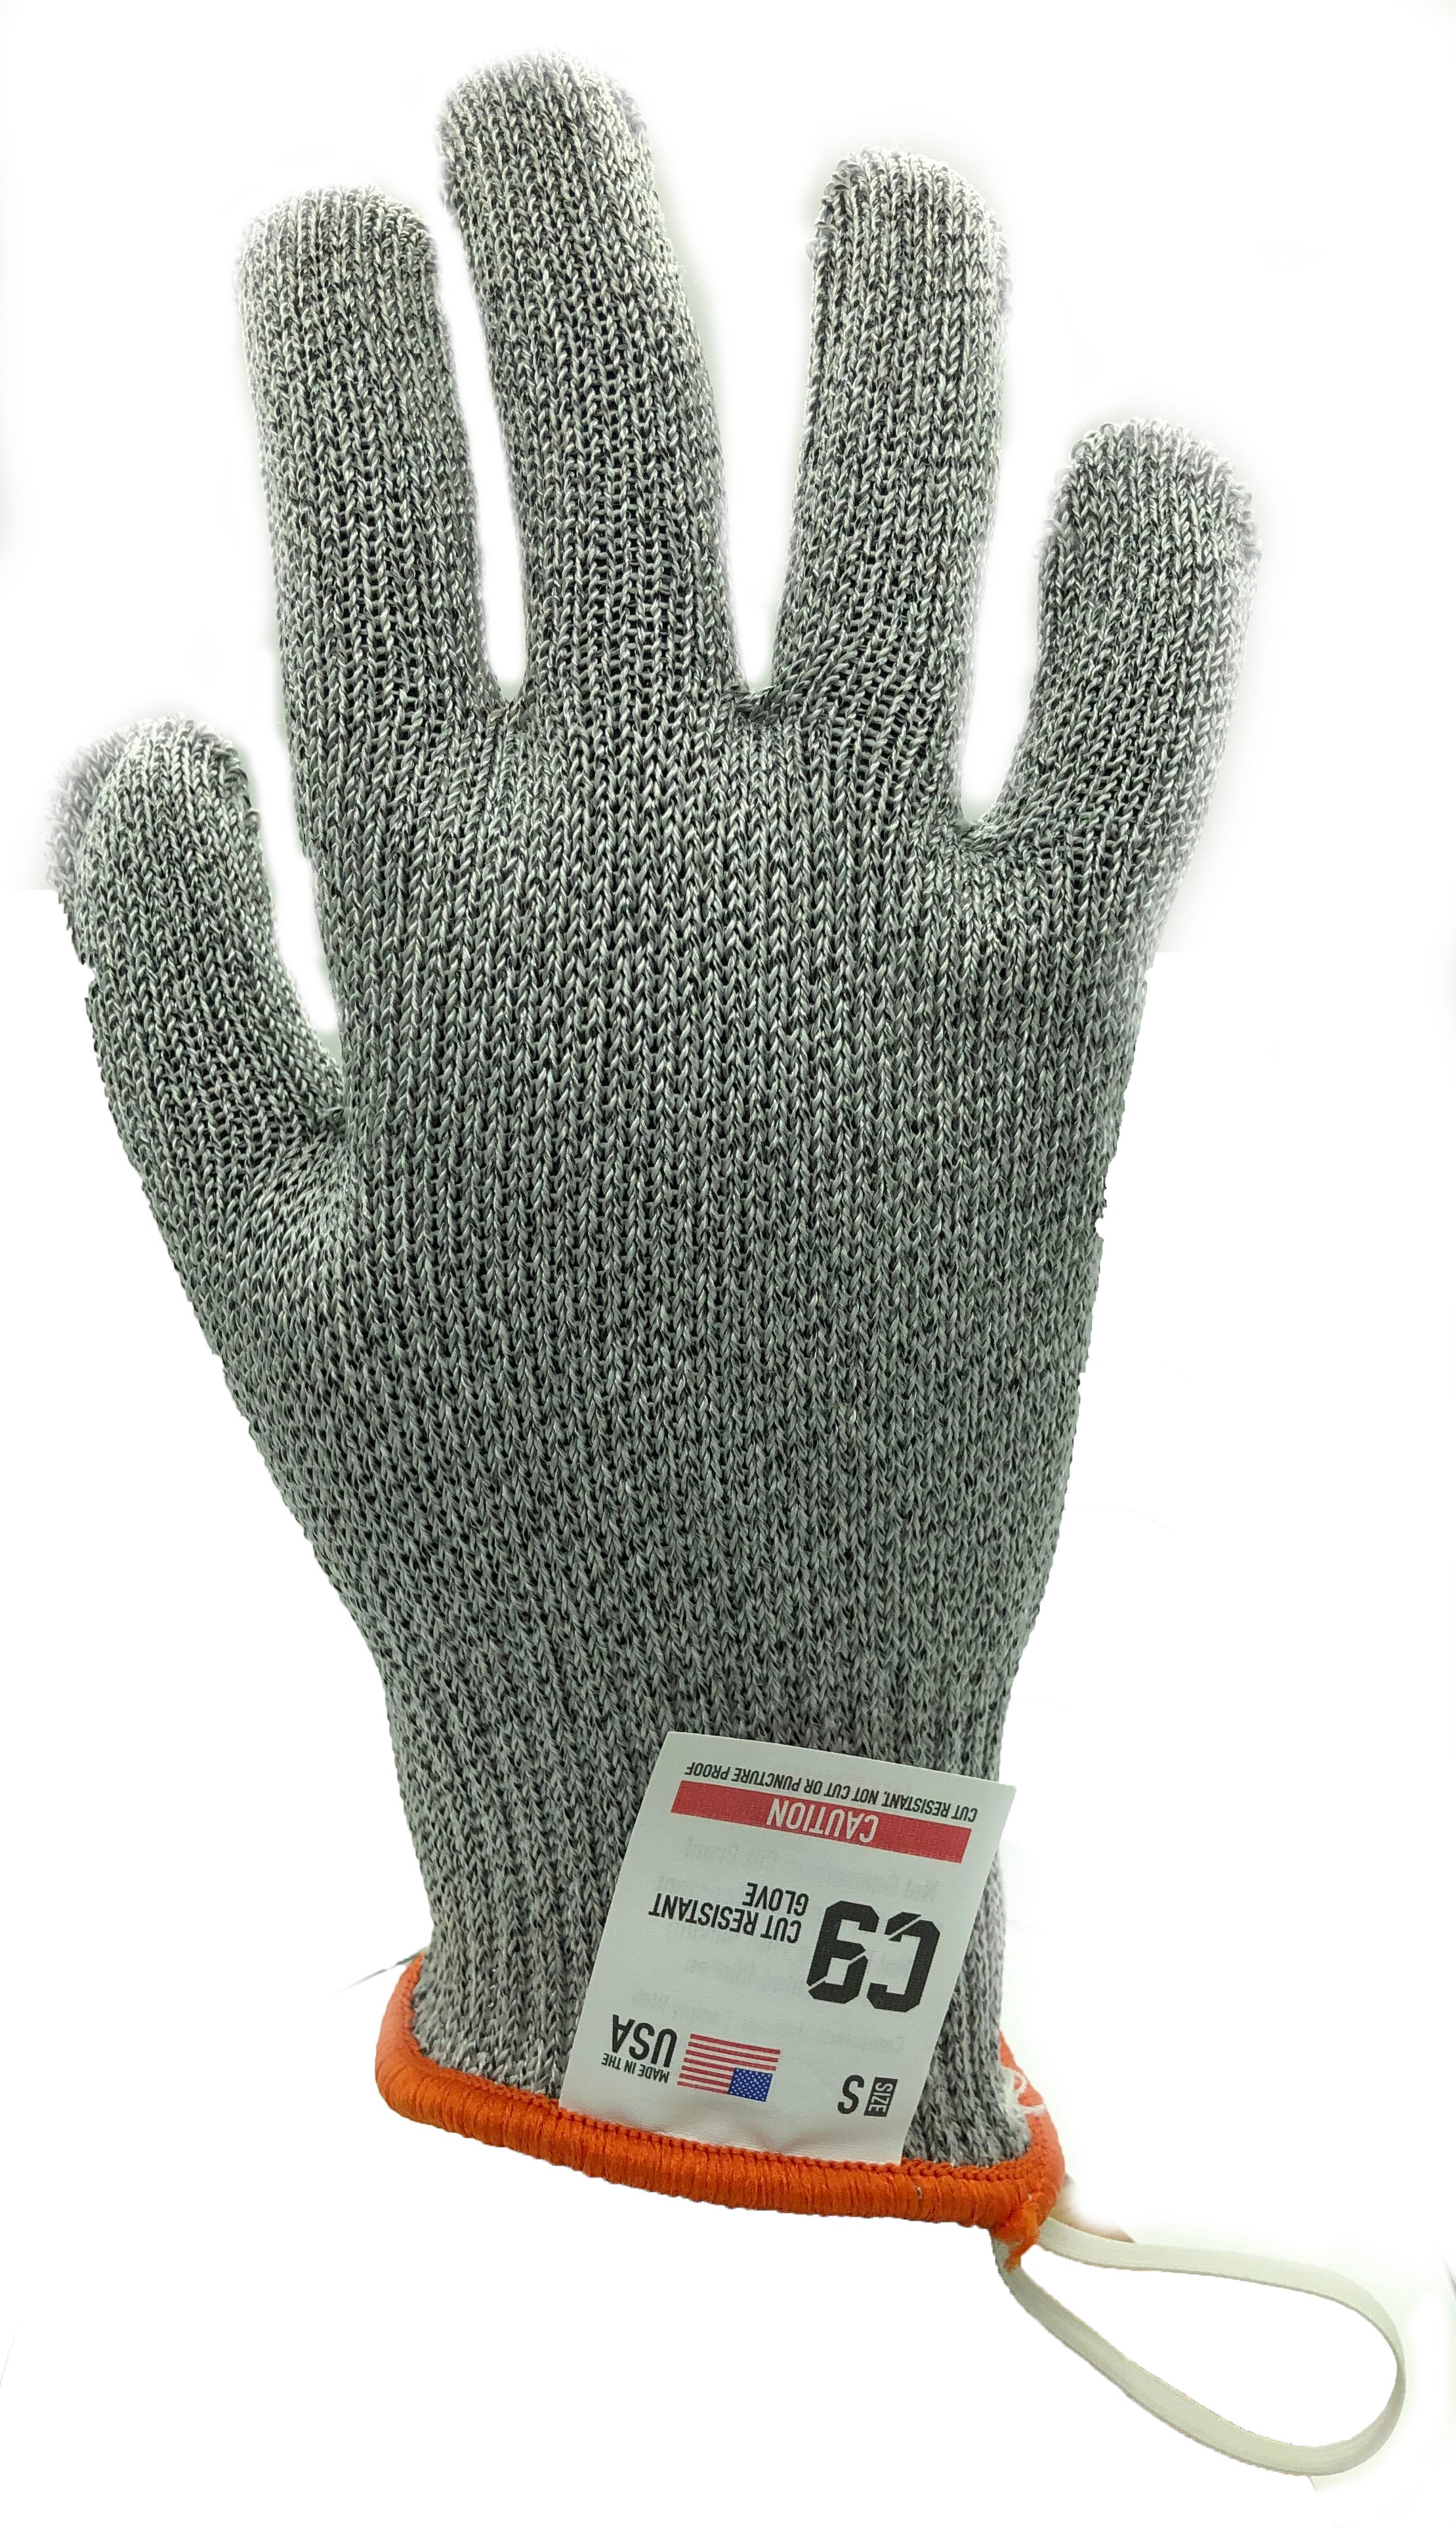 What are cut resistant gloves made from?